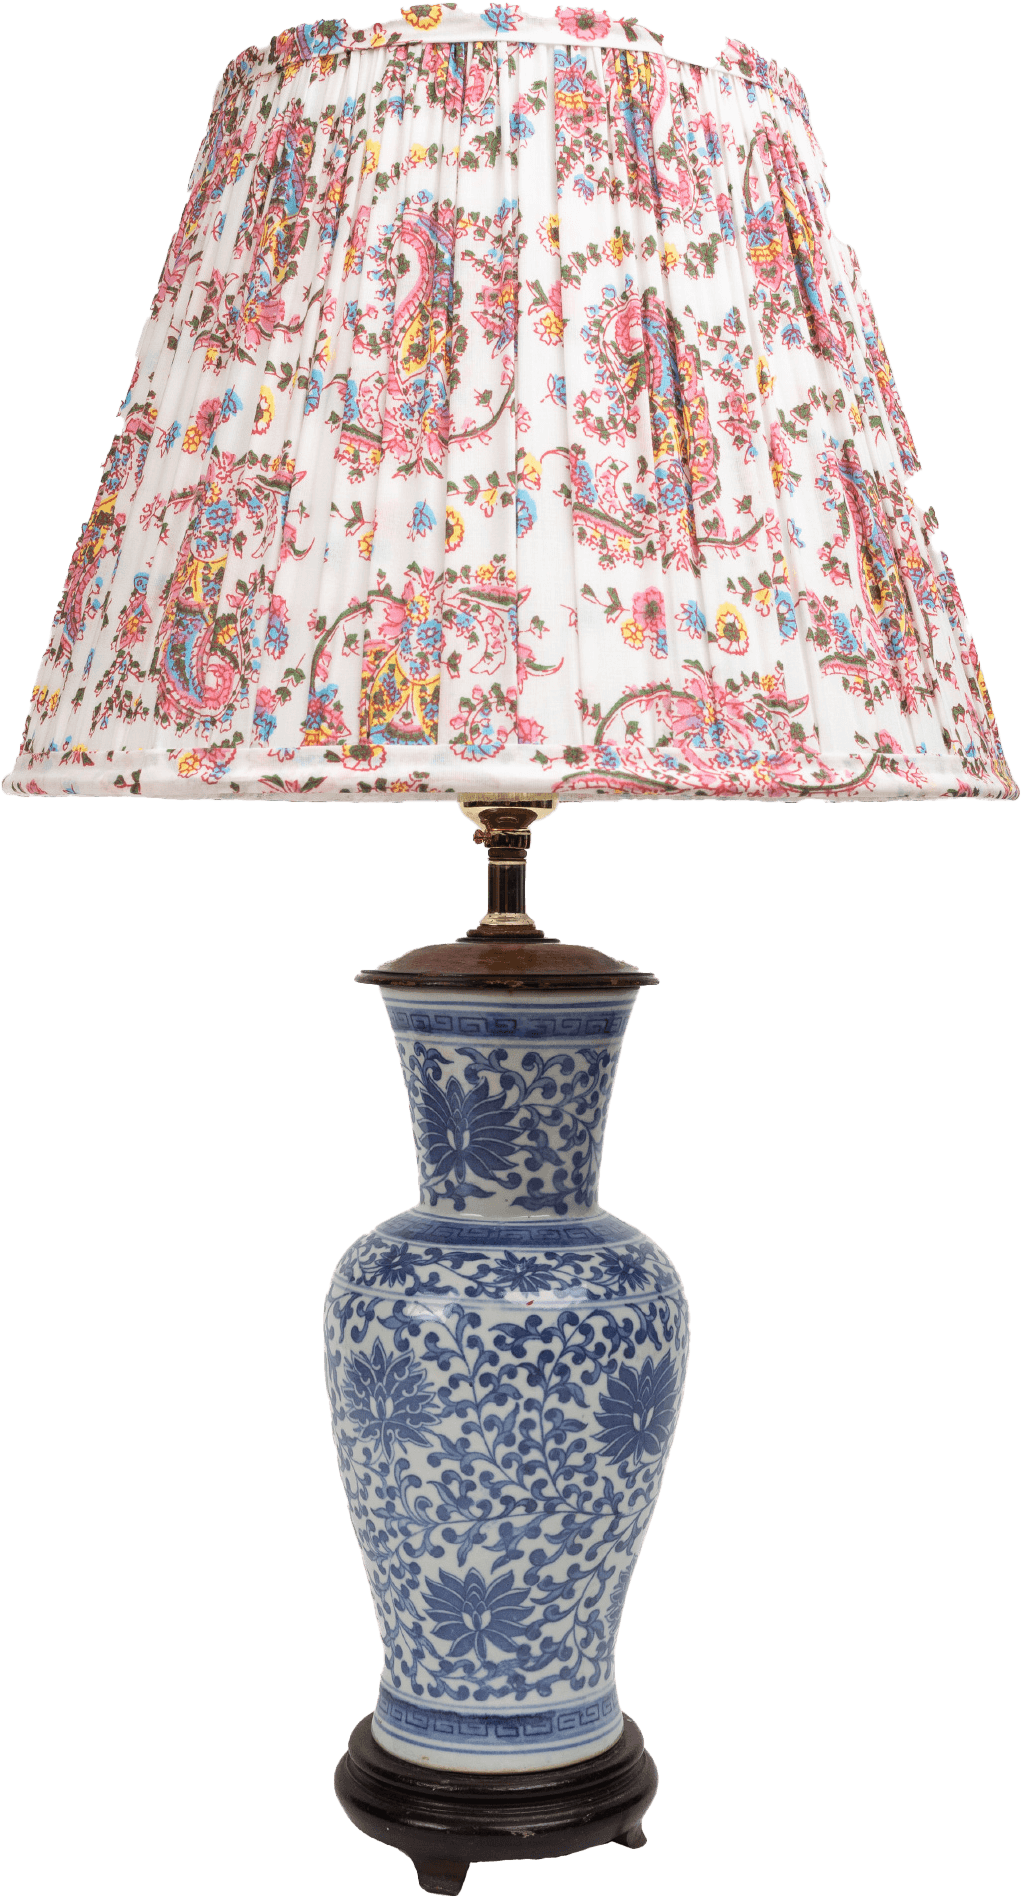 Pleated Lampshade in Paisley Pink with Euro Uno Fitting - Sophie Williamson Design